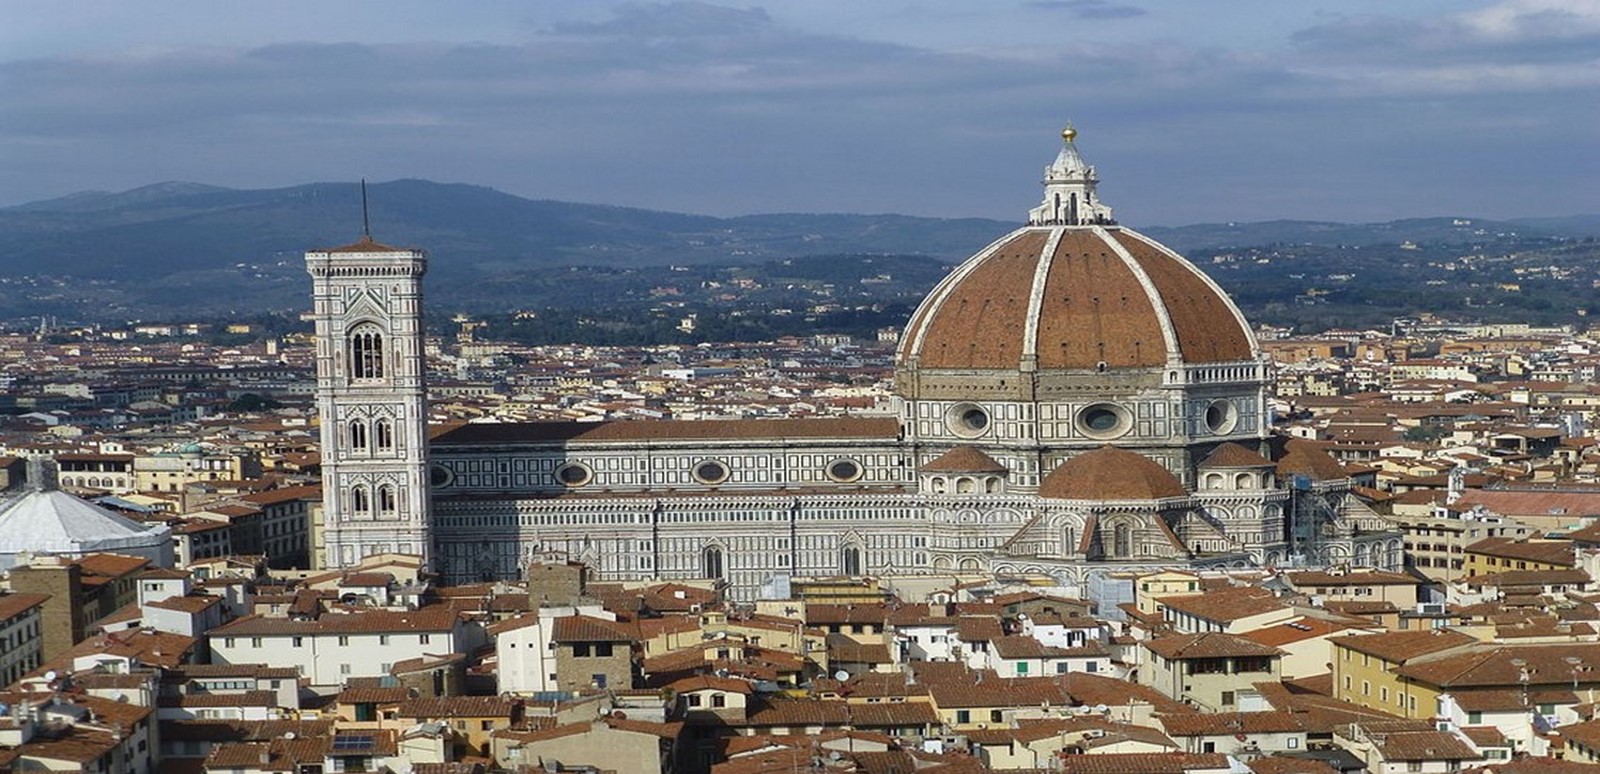 Architecture of Cities: Florence- Jewel of the Renaissance - Sheet6